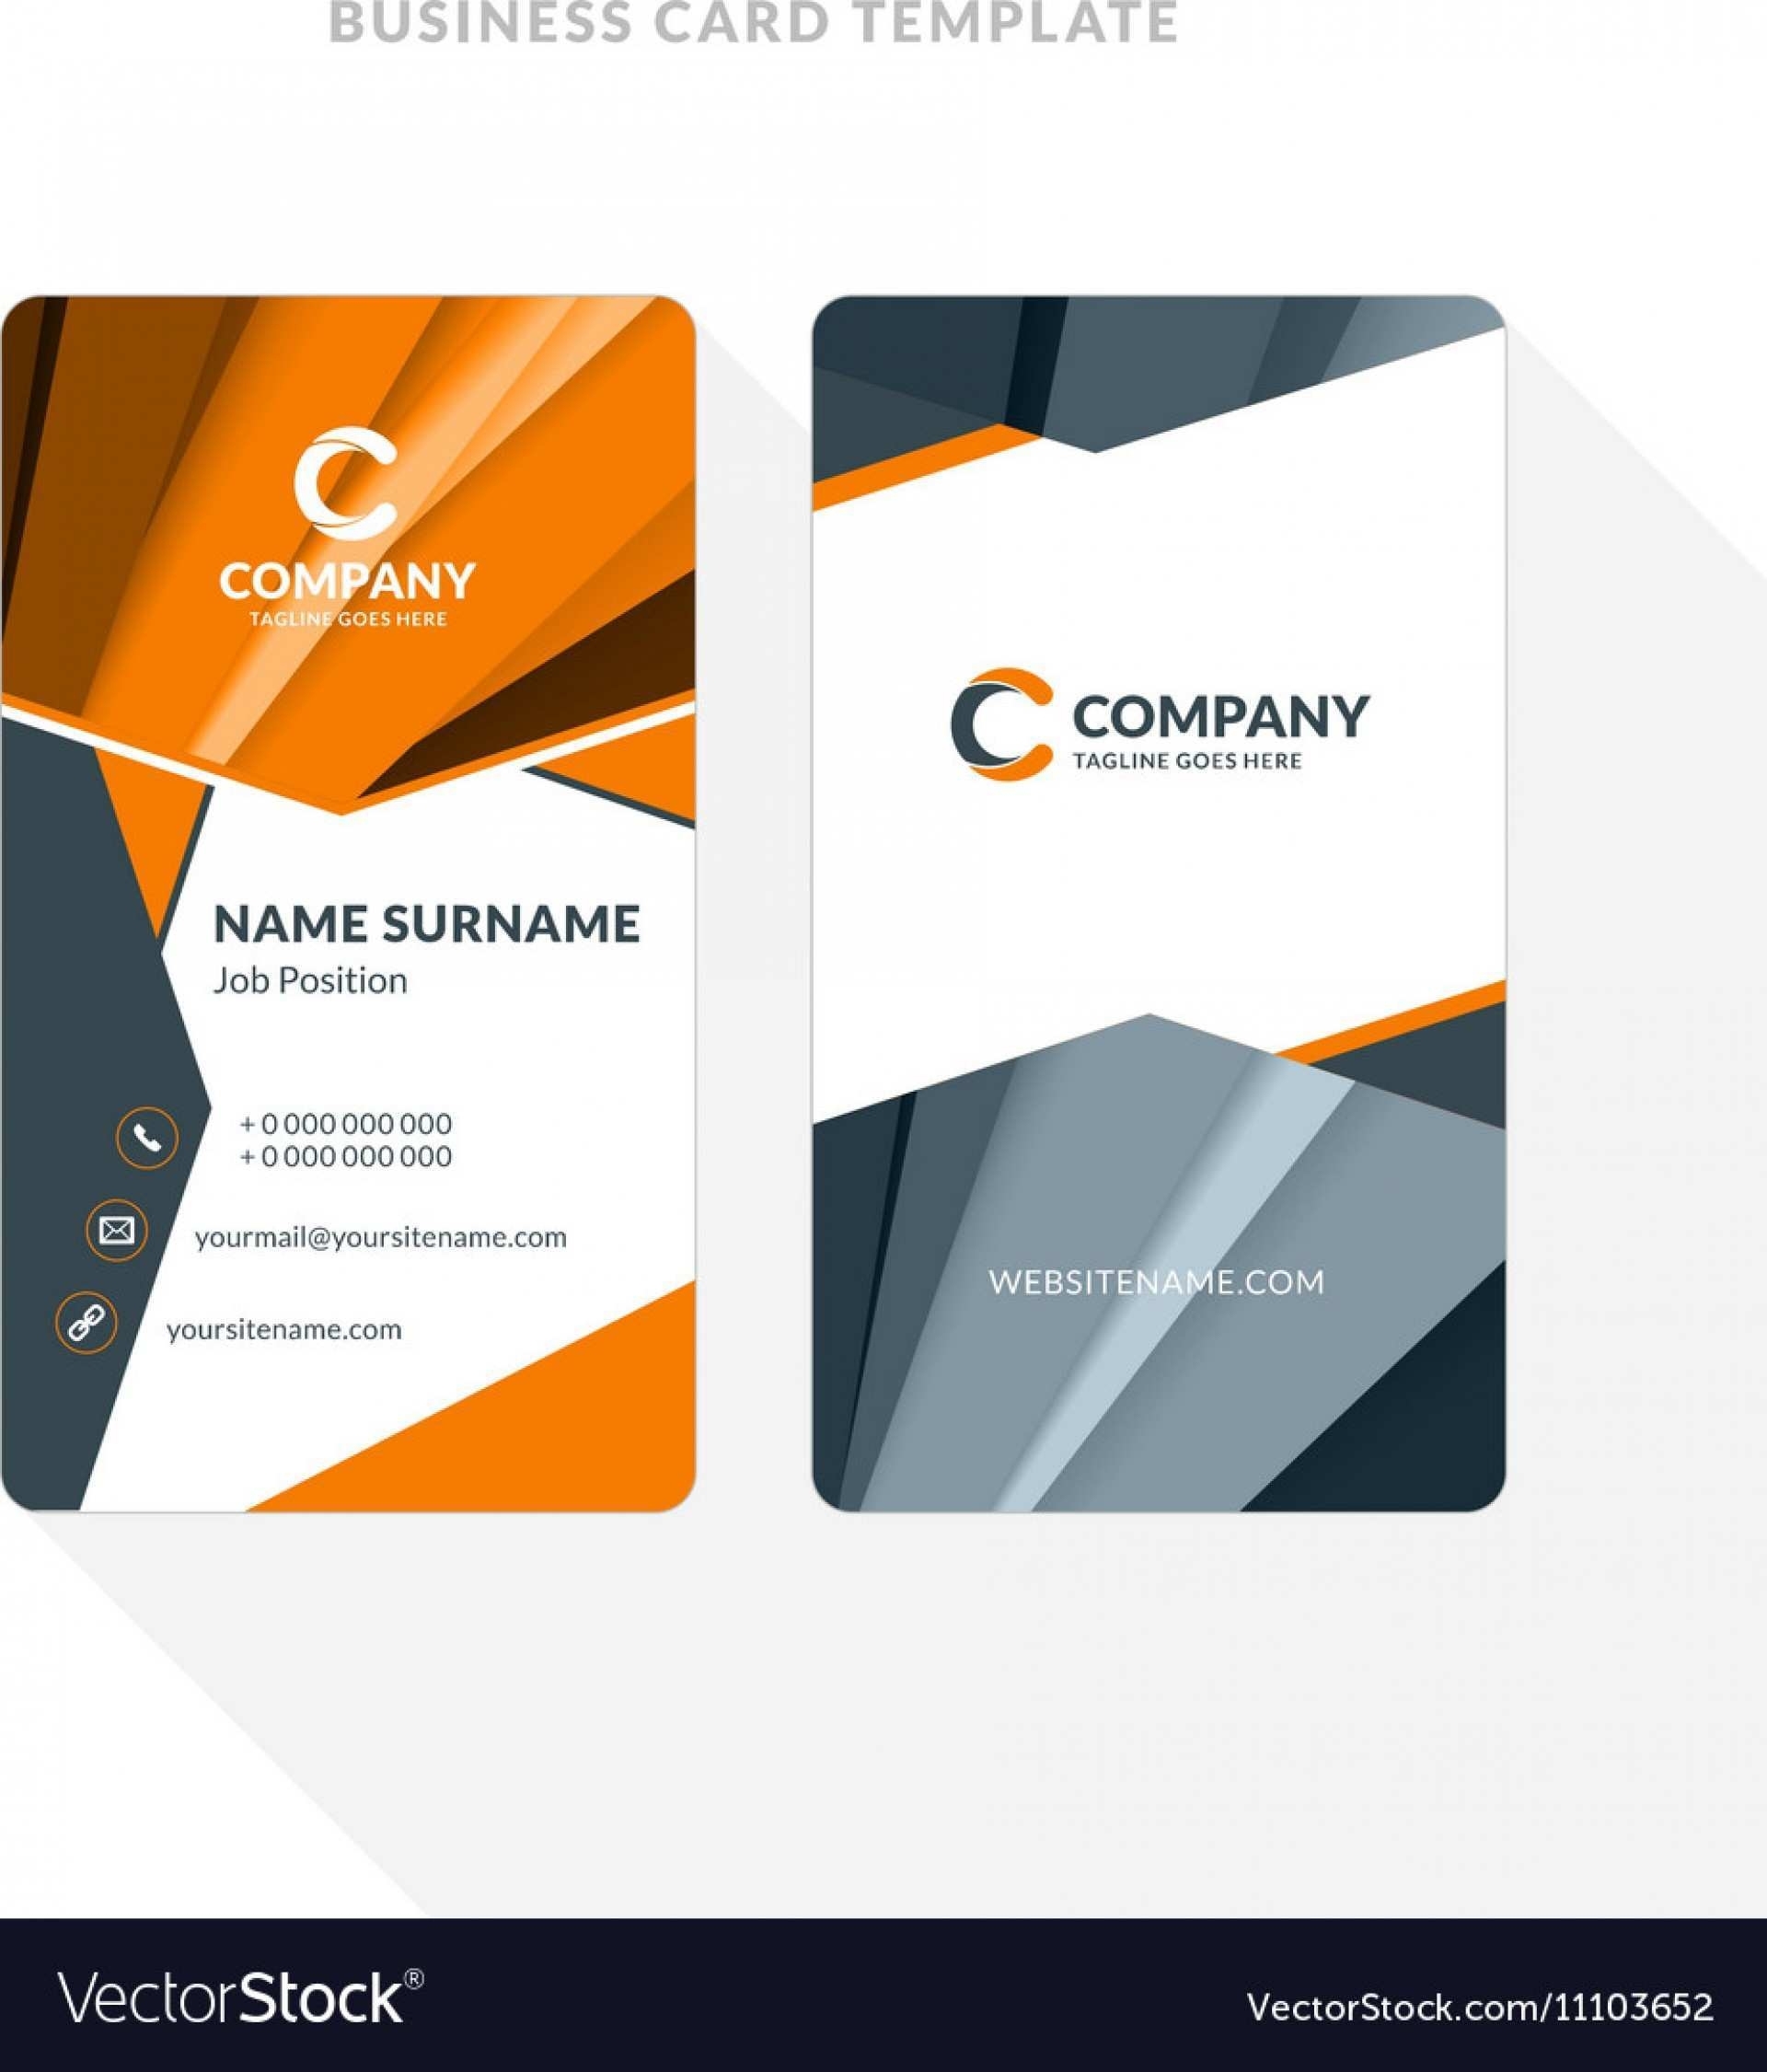 Word Business Card Template Double Sided - Cards Design Templates Throughout Plain Business Card Template Word